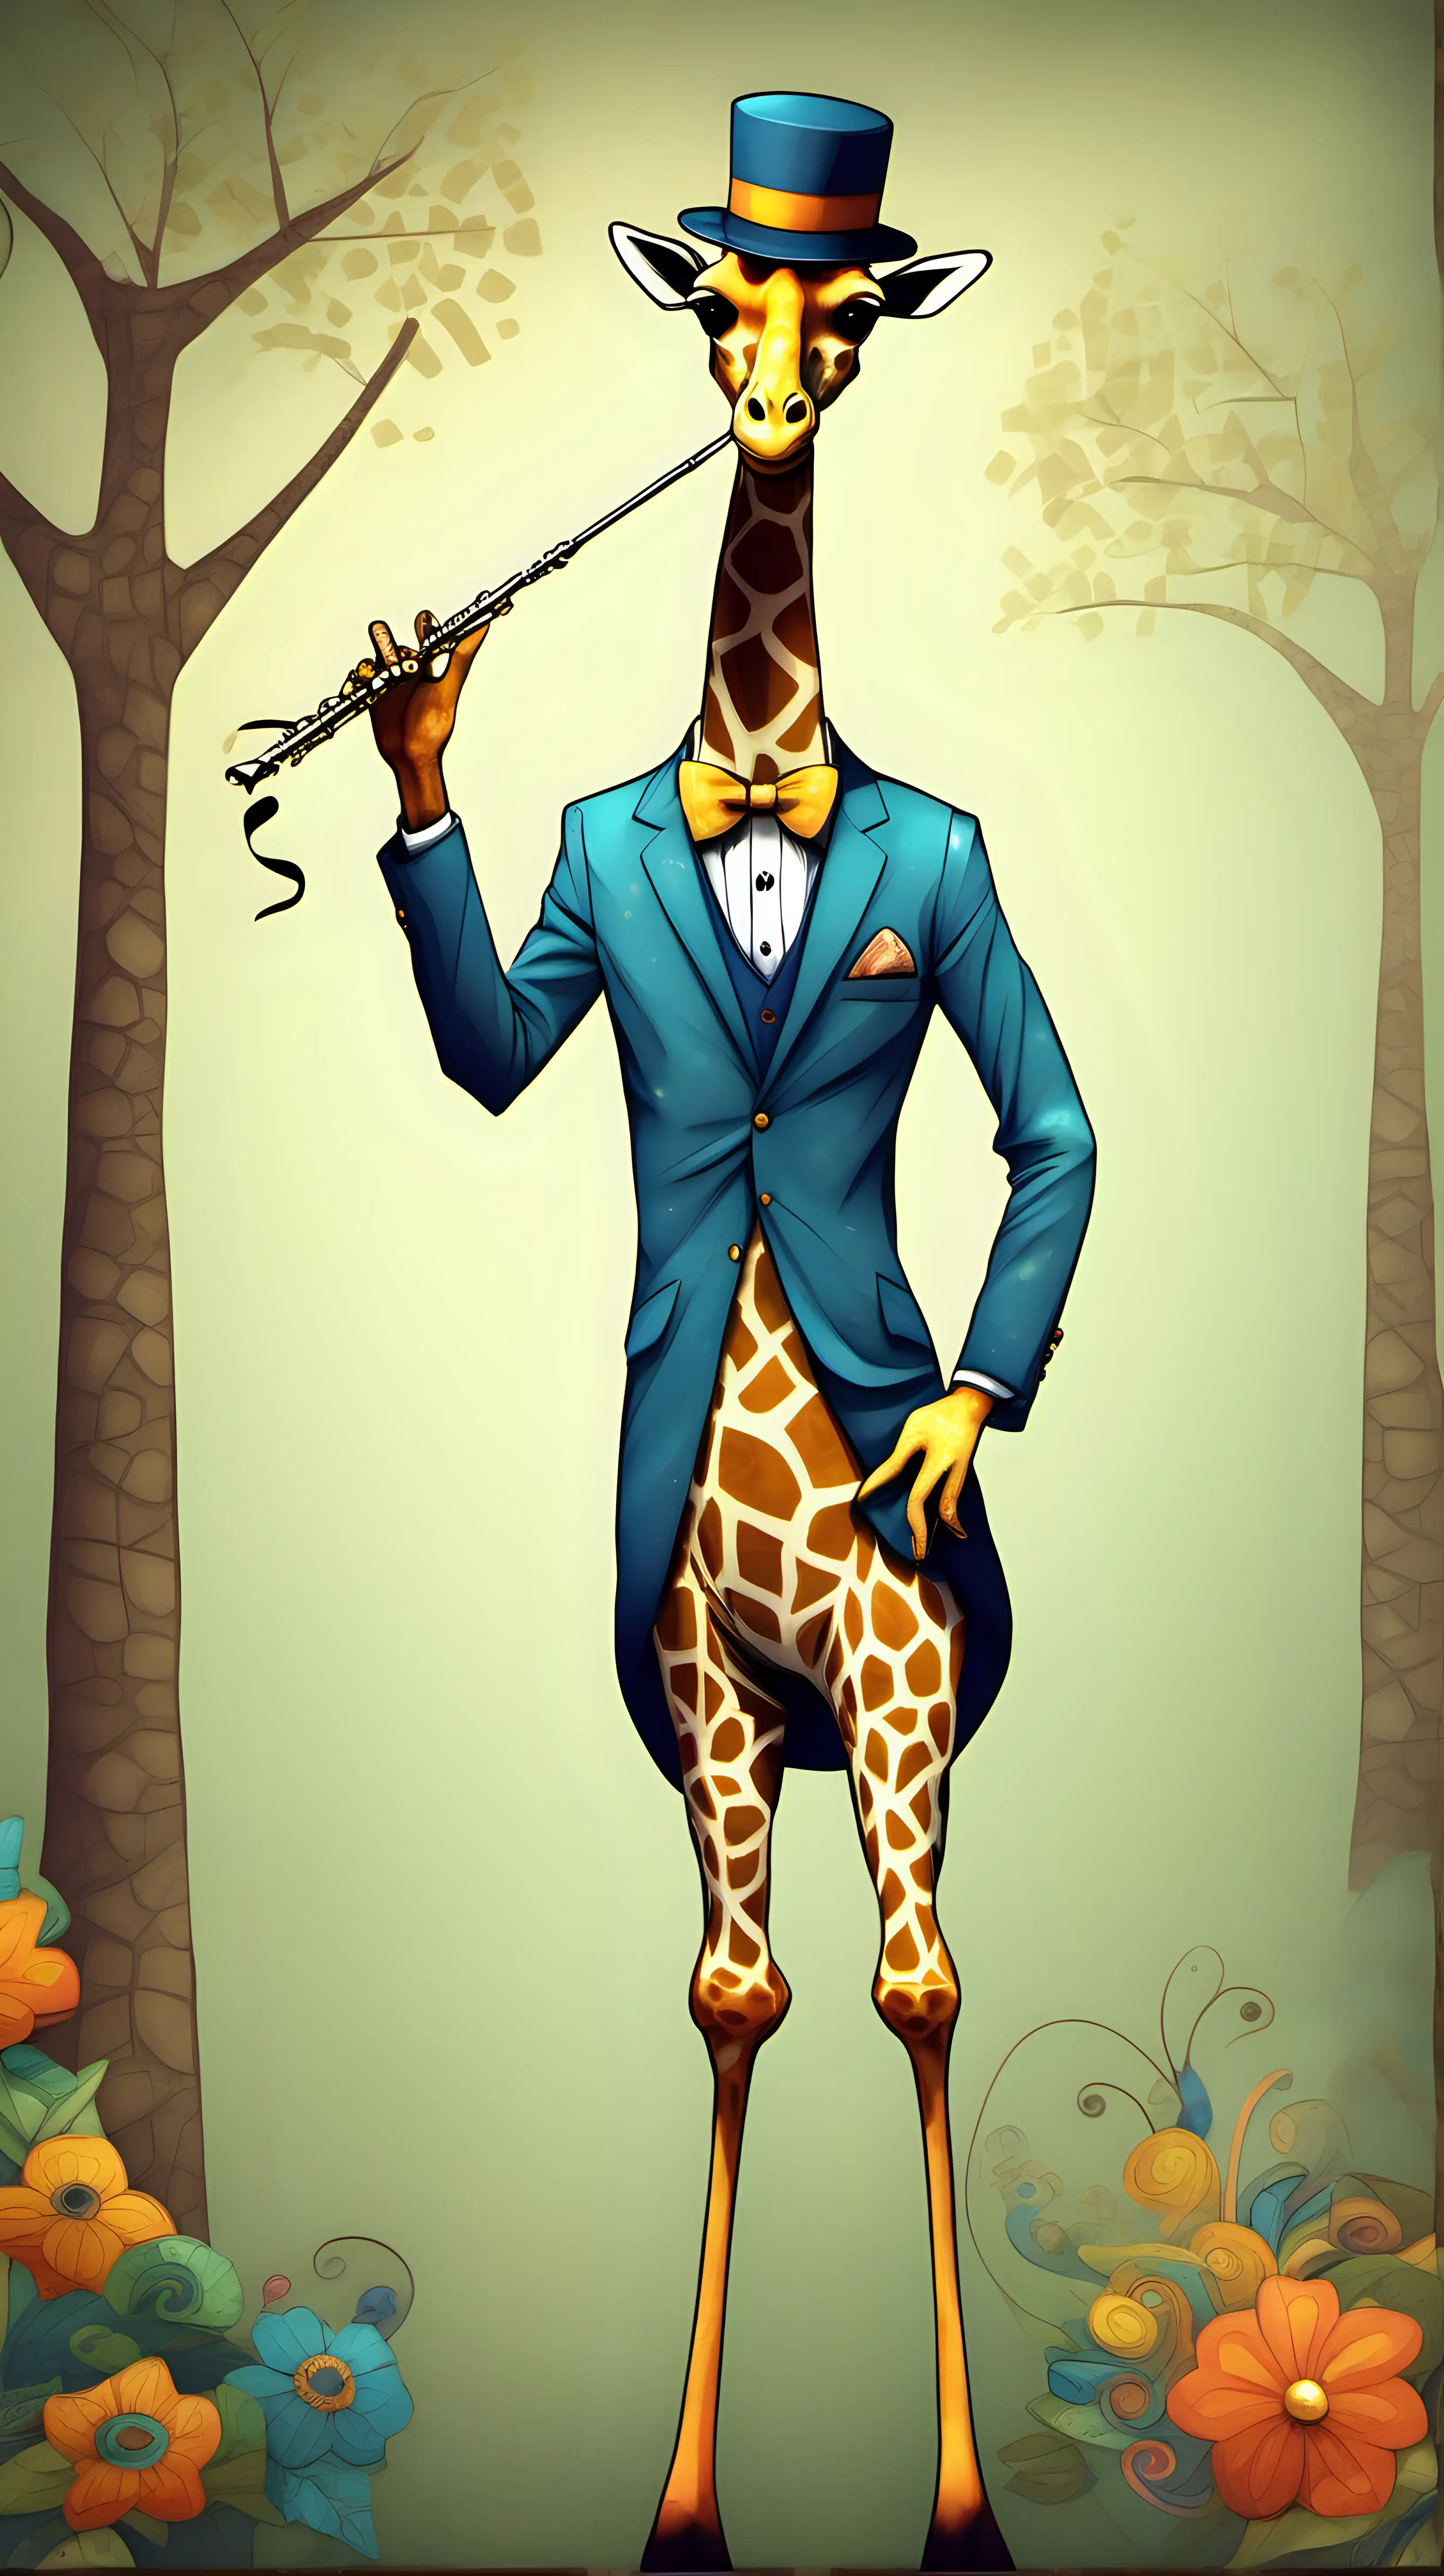 A tall, slender giraffe wearing a dapper suit, complete with a bow tie and a jaunty hat. It should have a gentle, friendly face, and be depicted playing a flute or dancing joyfully. The suit can be colorful, adding to the whimsical nature of Dreamland.